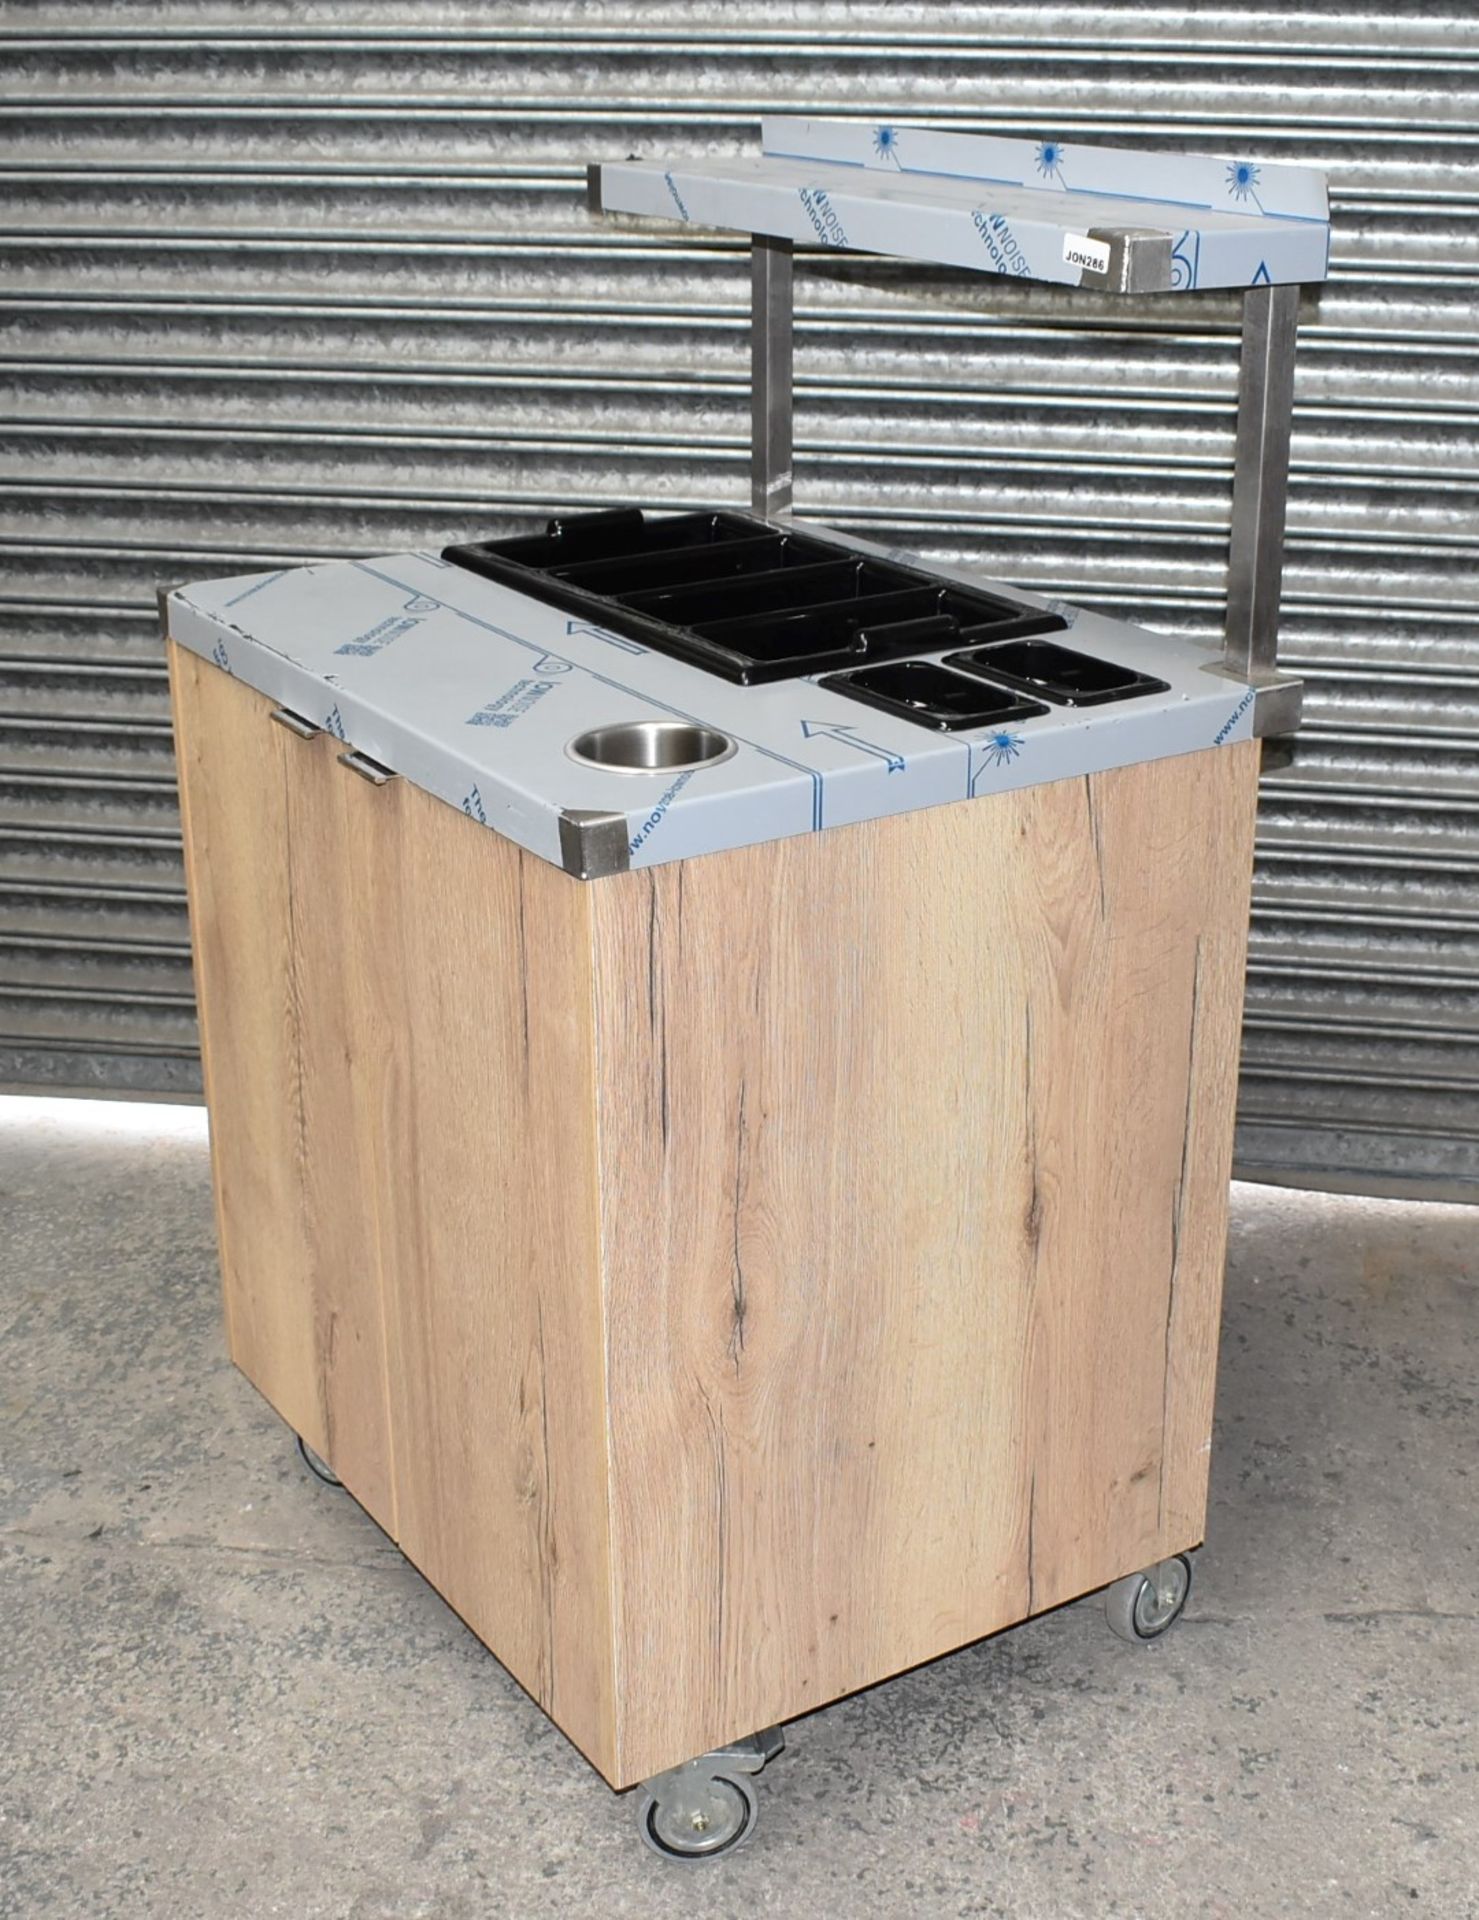 1 x Cutlery Service Trolley Featuring an Oak Cabinet With Internal Drawers, Stainless Steel - Image 12 of 13